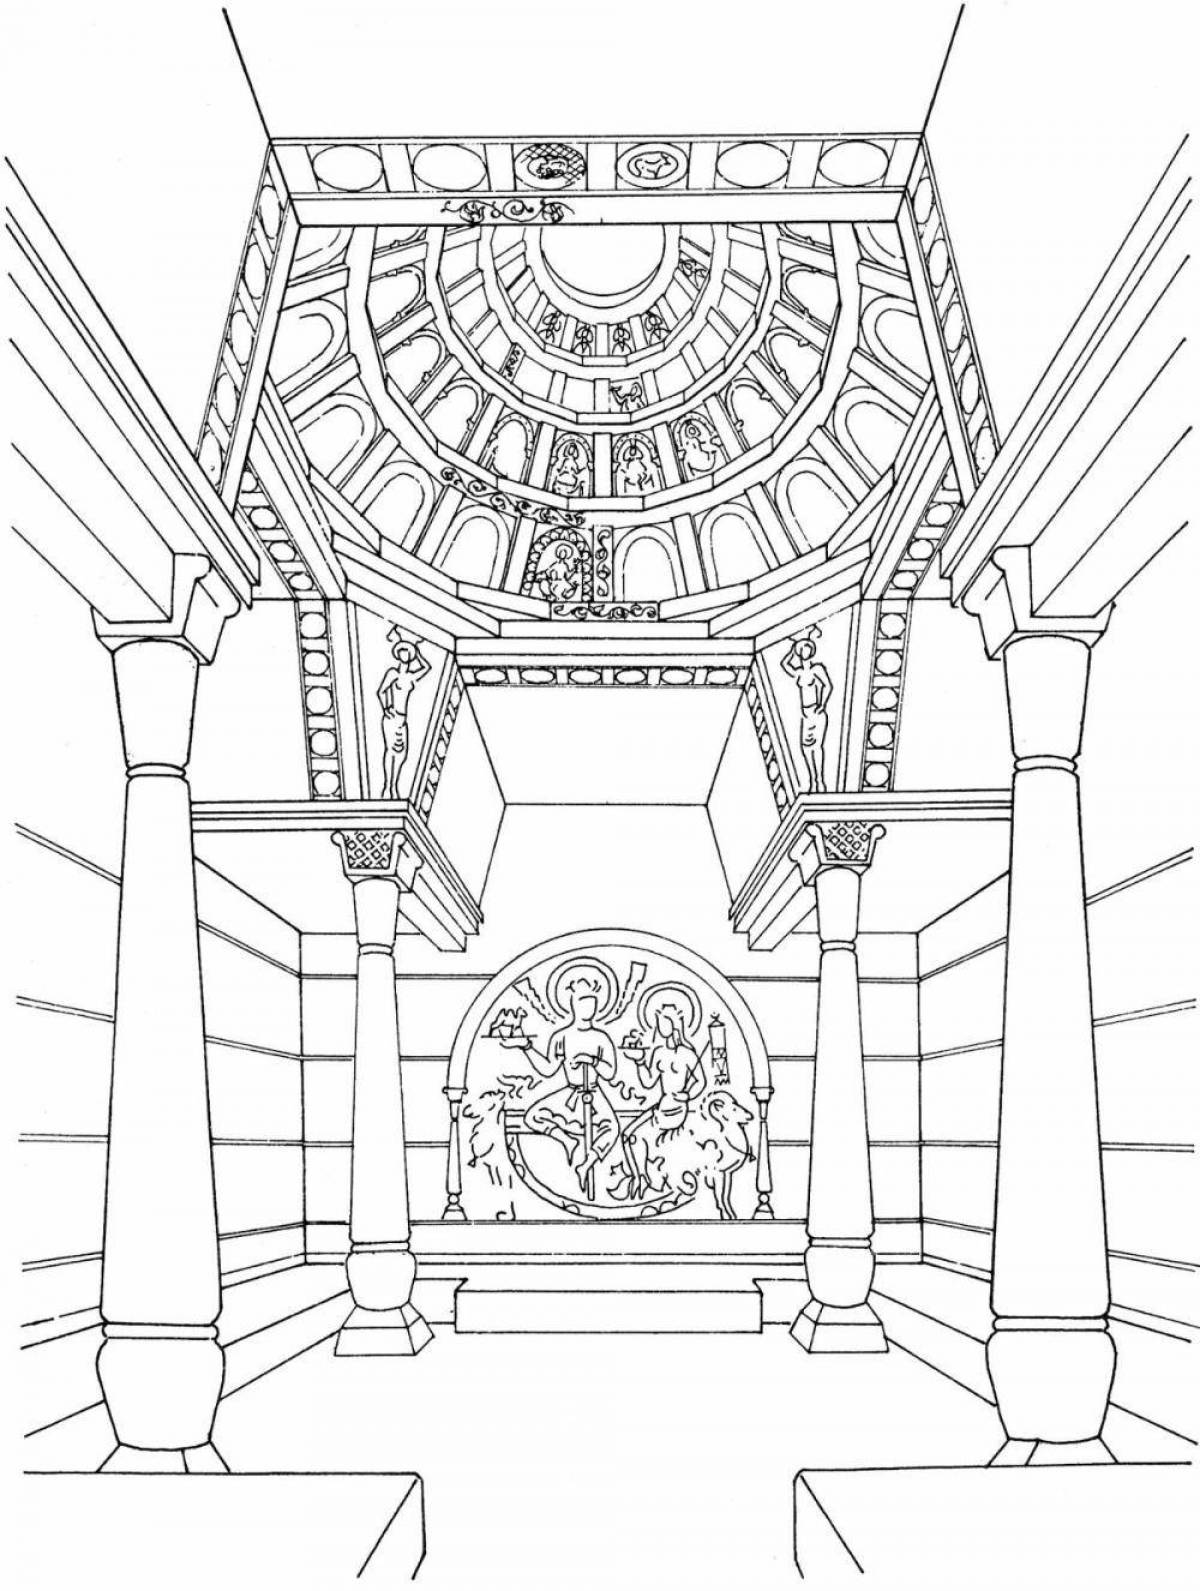 Coloring book luxurious hermitage